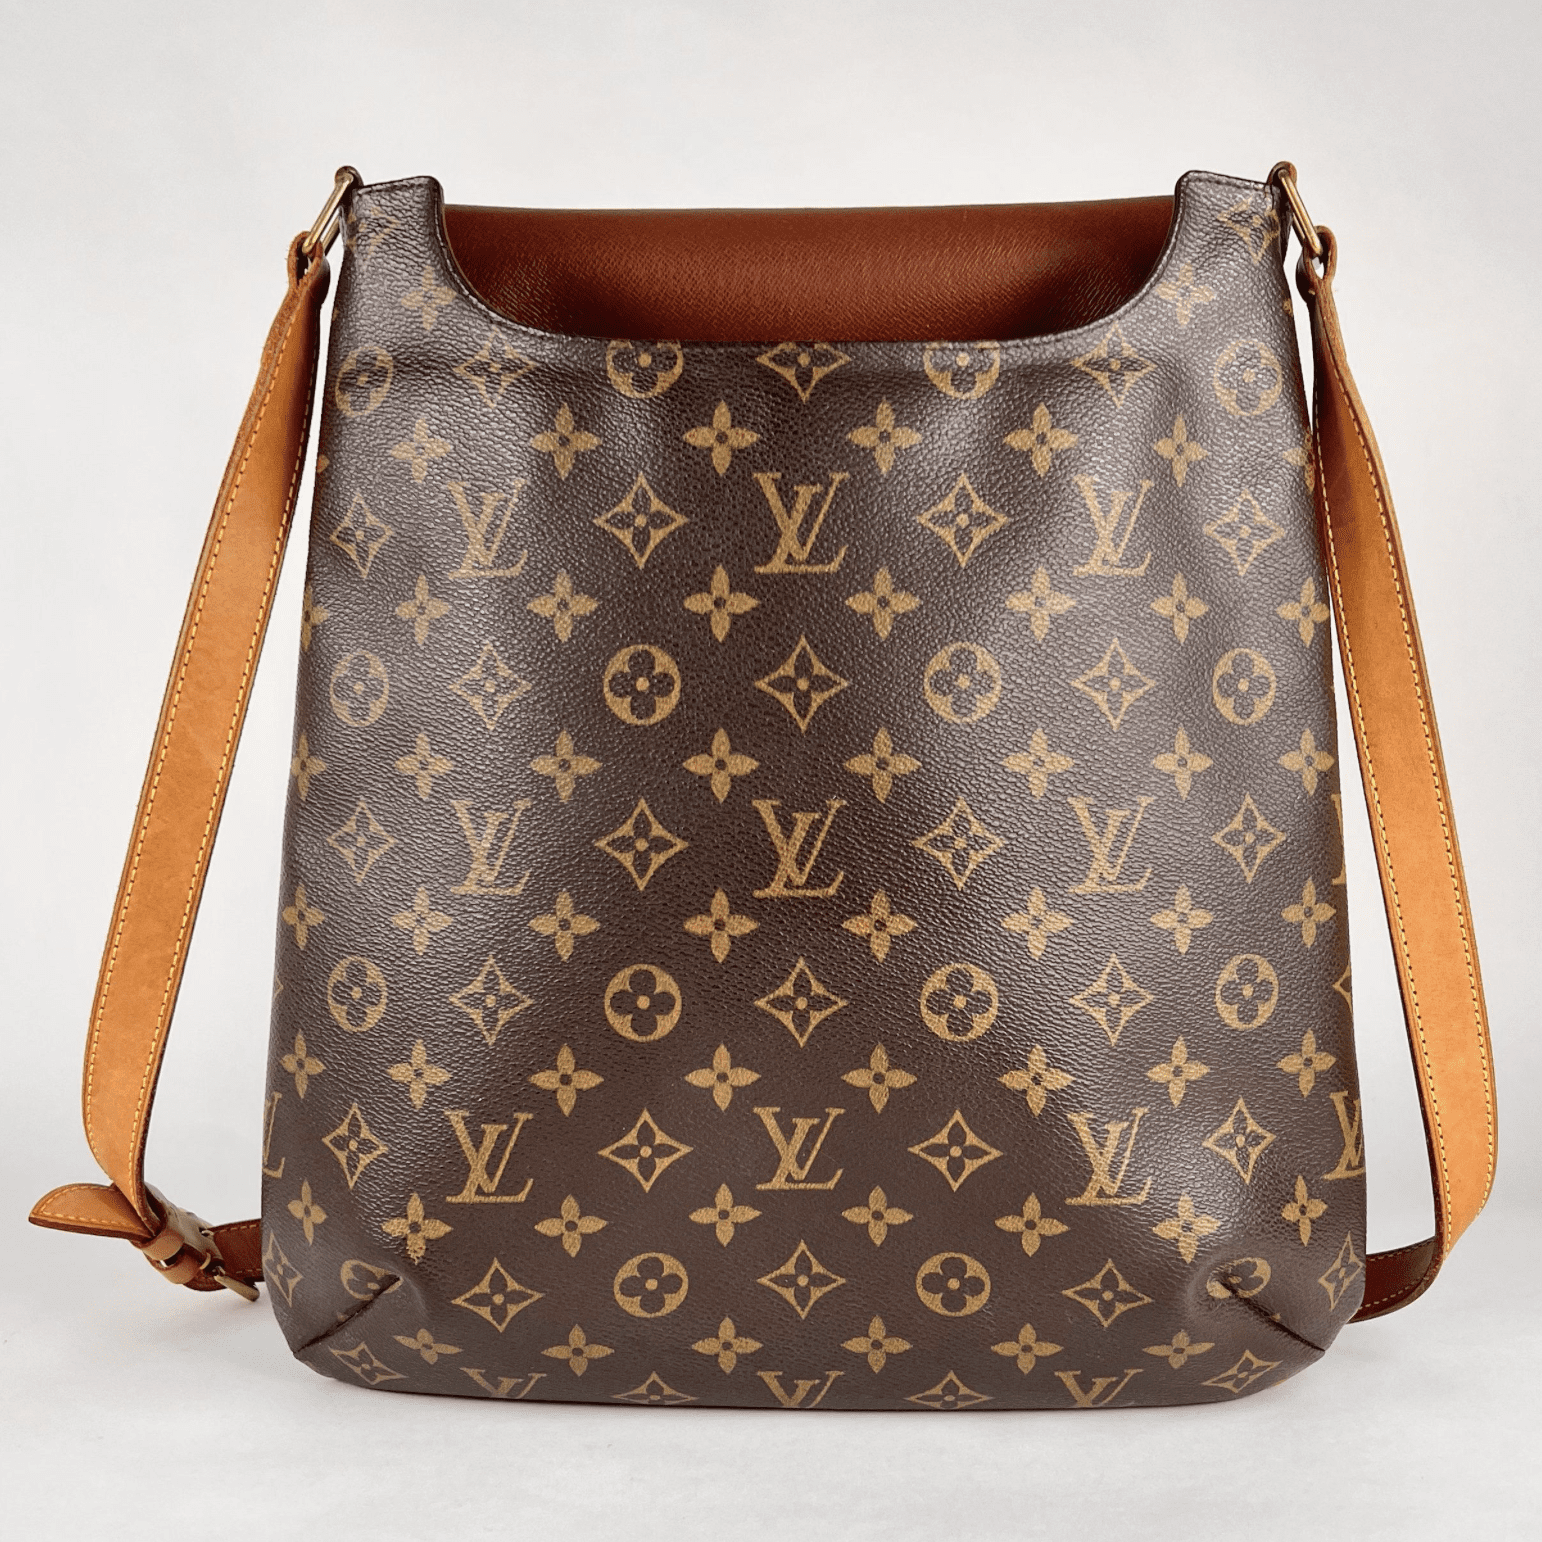 Designer Handbags, New And Used Louis Vuitton Bags